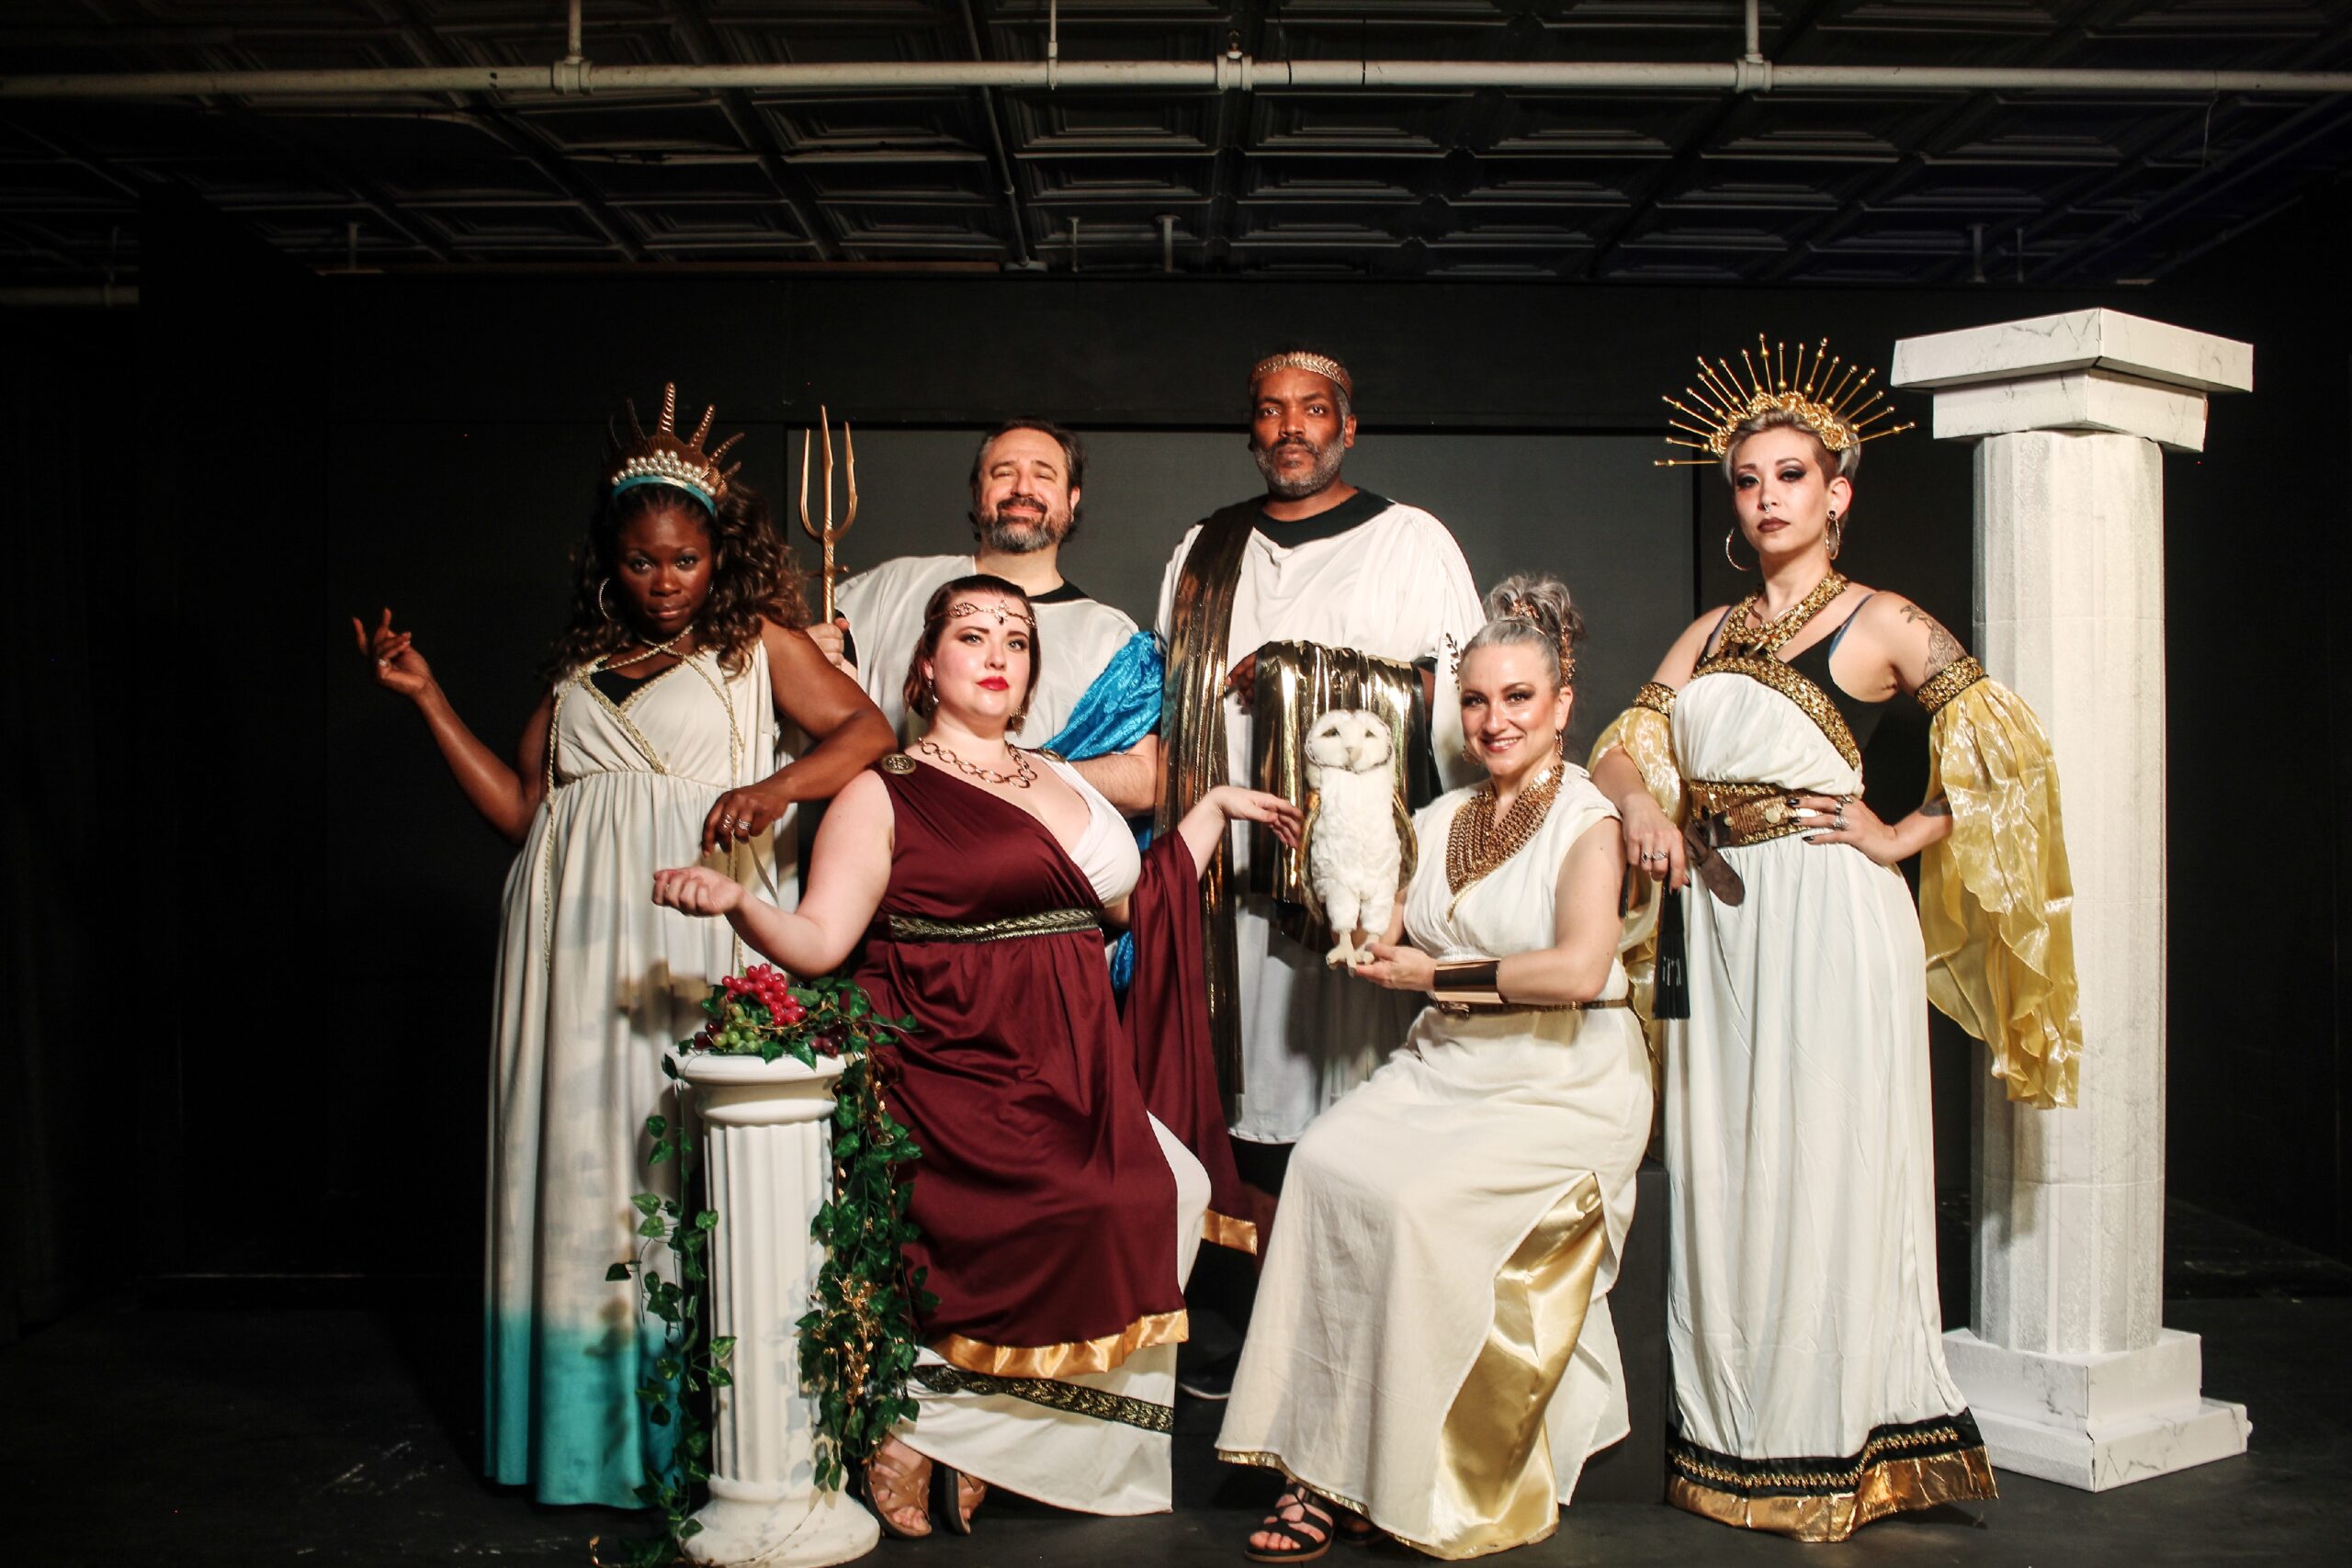 High-Spirited Cast Makes 'Clash Of The Titans' Parody A Jolly Time